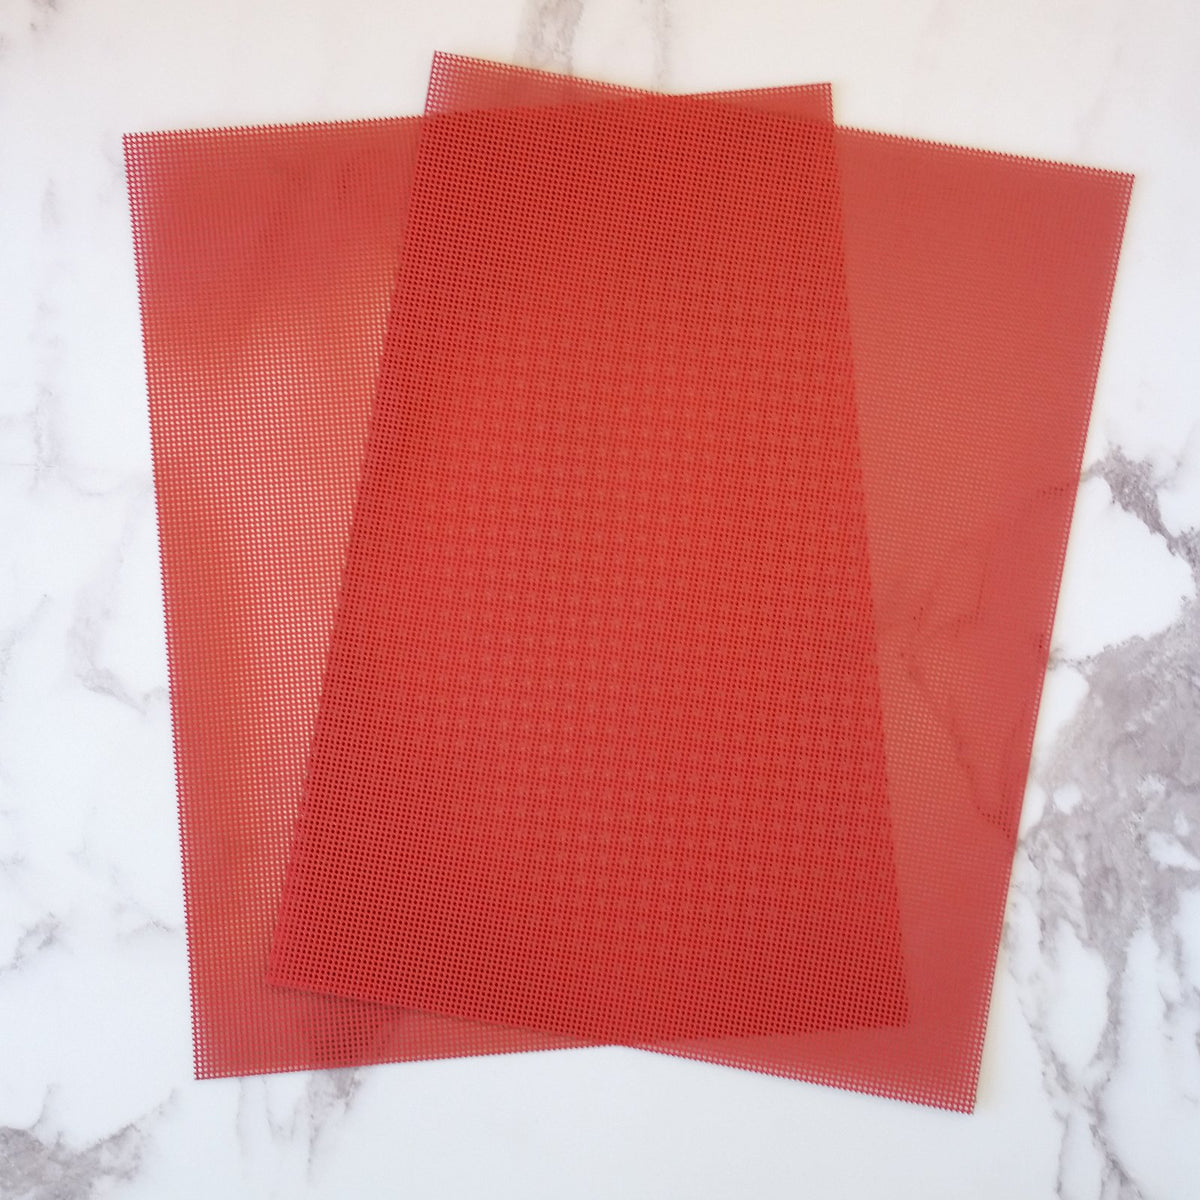 Painted Perforated Paper - Red